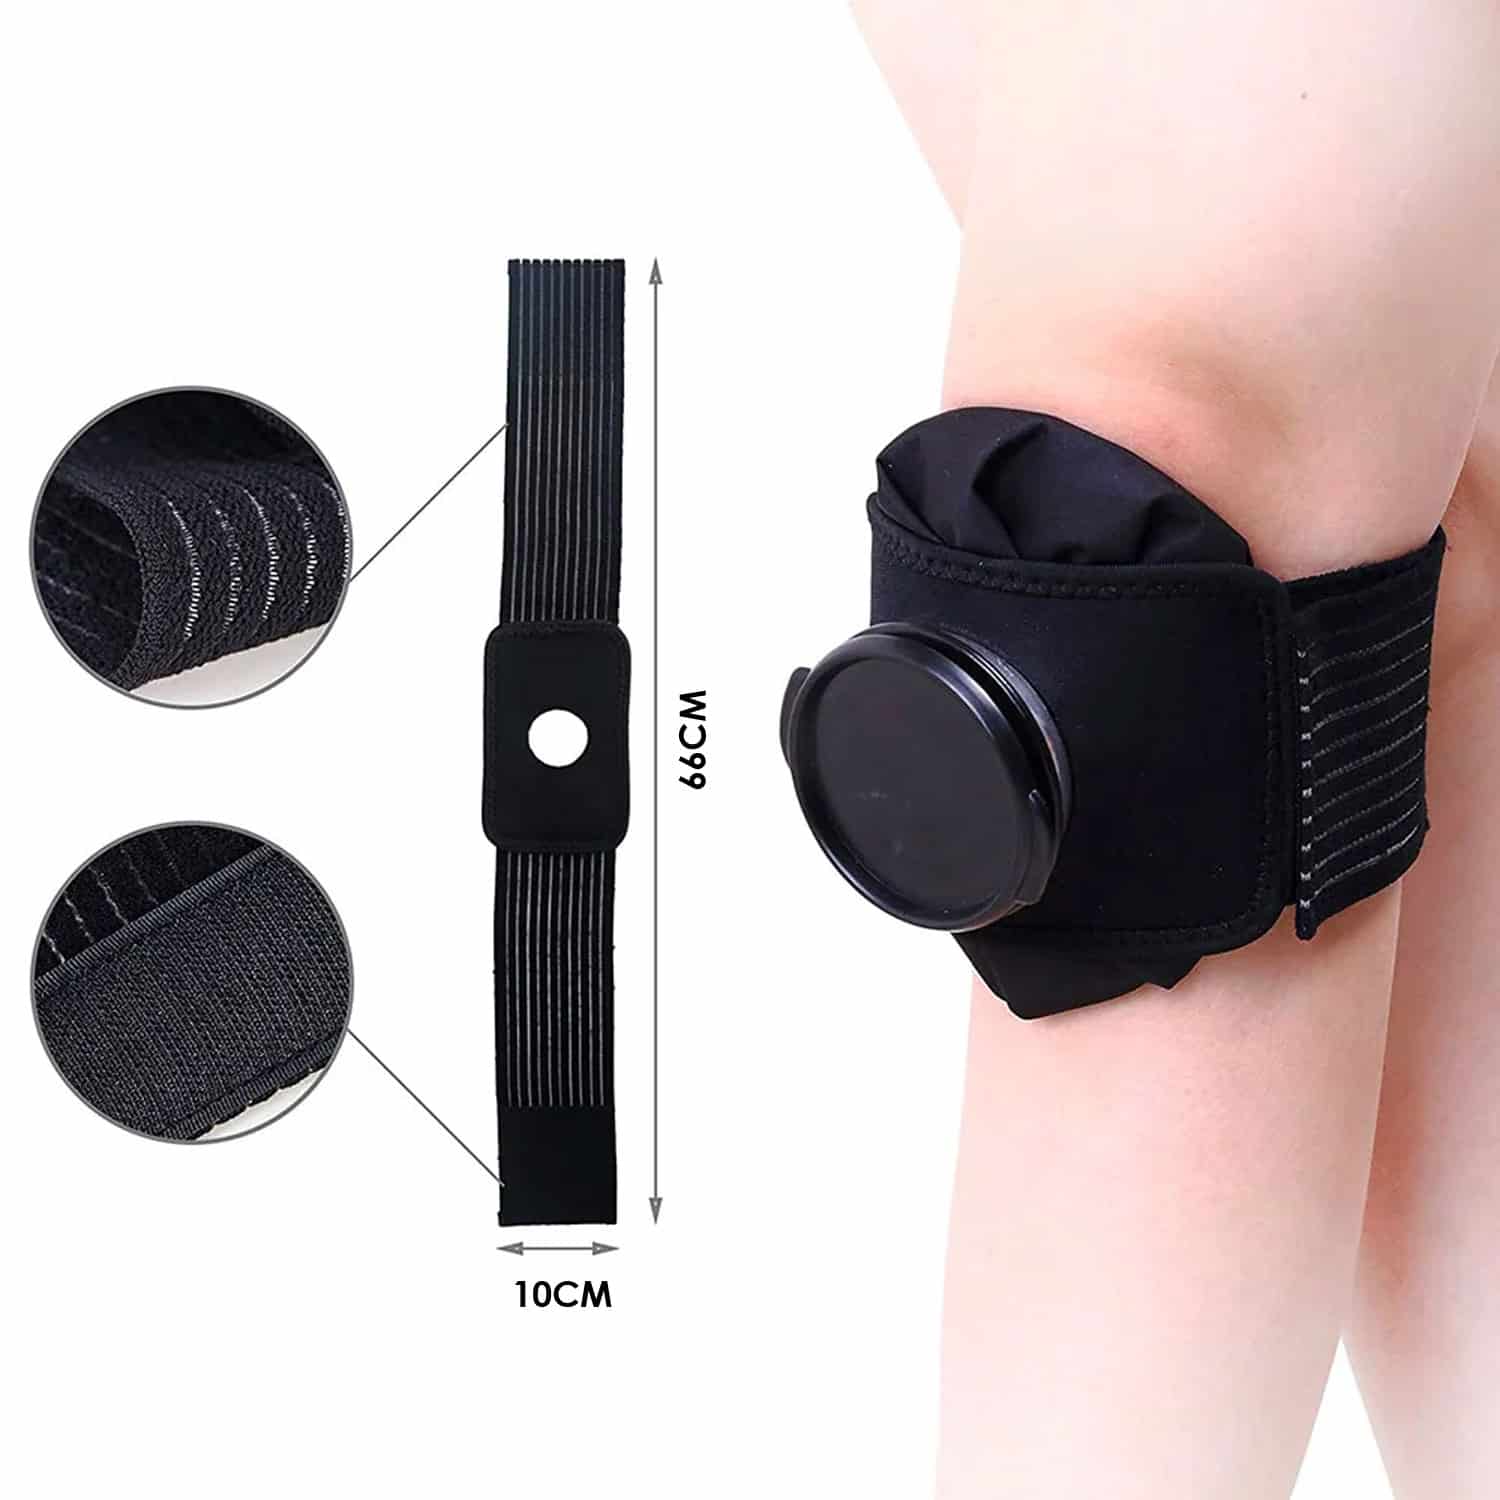 Ice and Heat Pack Reusable Band Strap